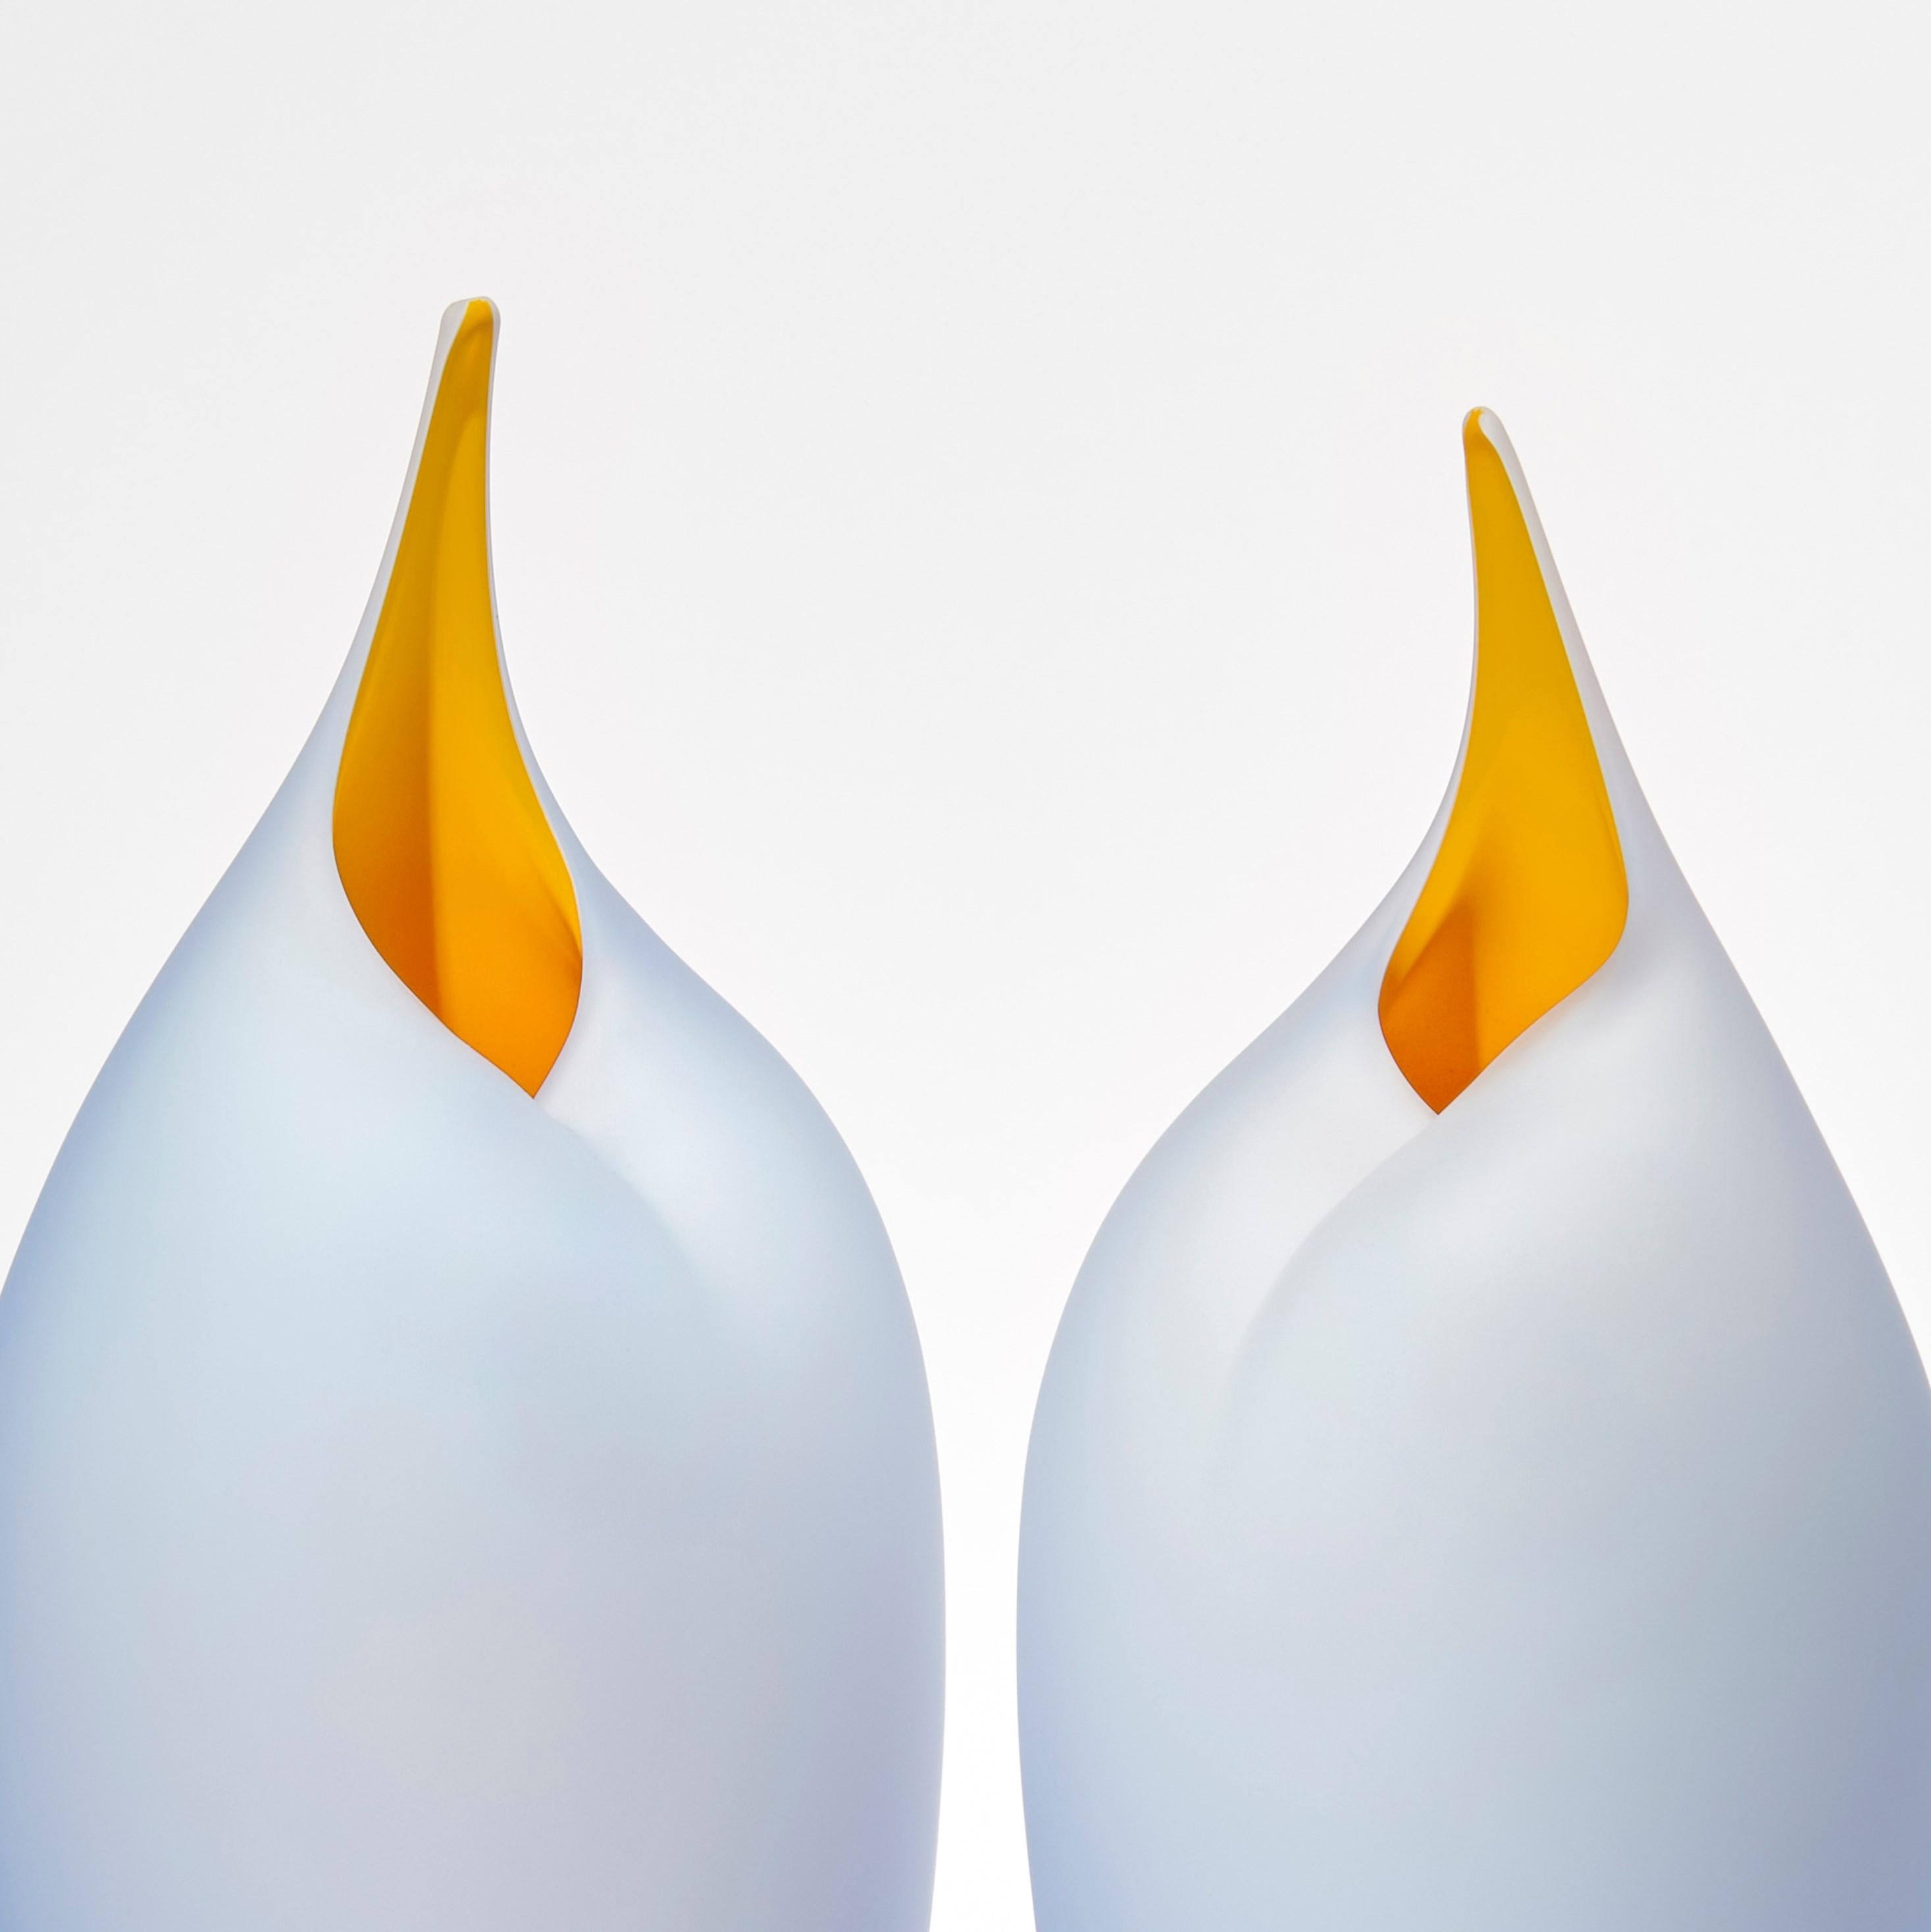 Organic Modern Tall Birds in Soft Blue & Yellow, a Pair of Glass Sculptures by Bruce Marks